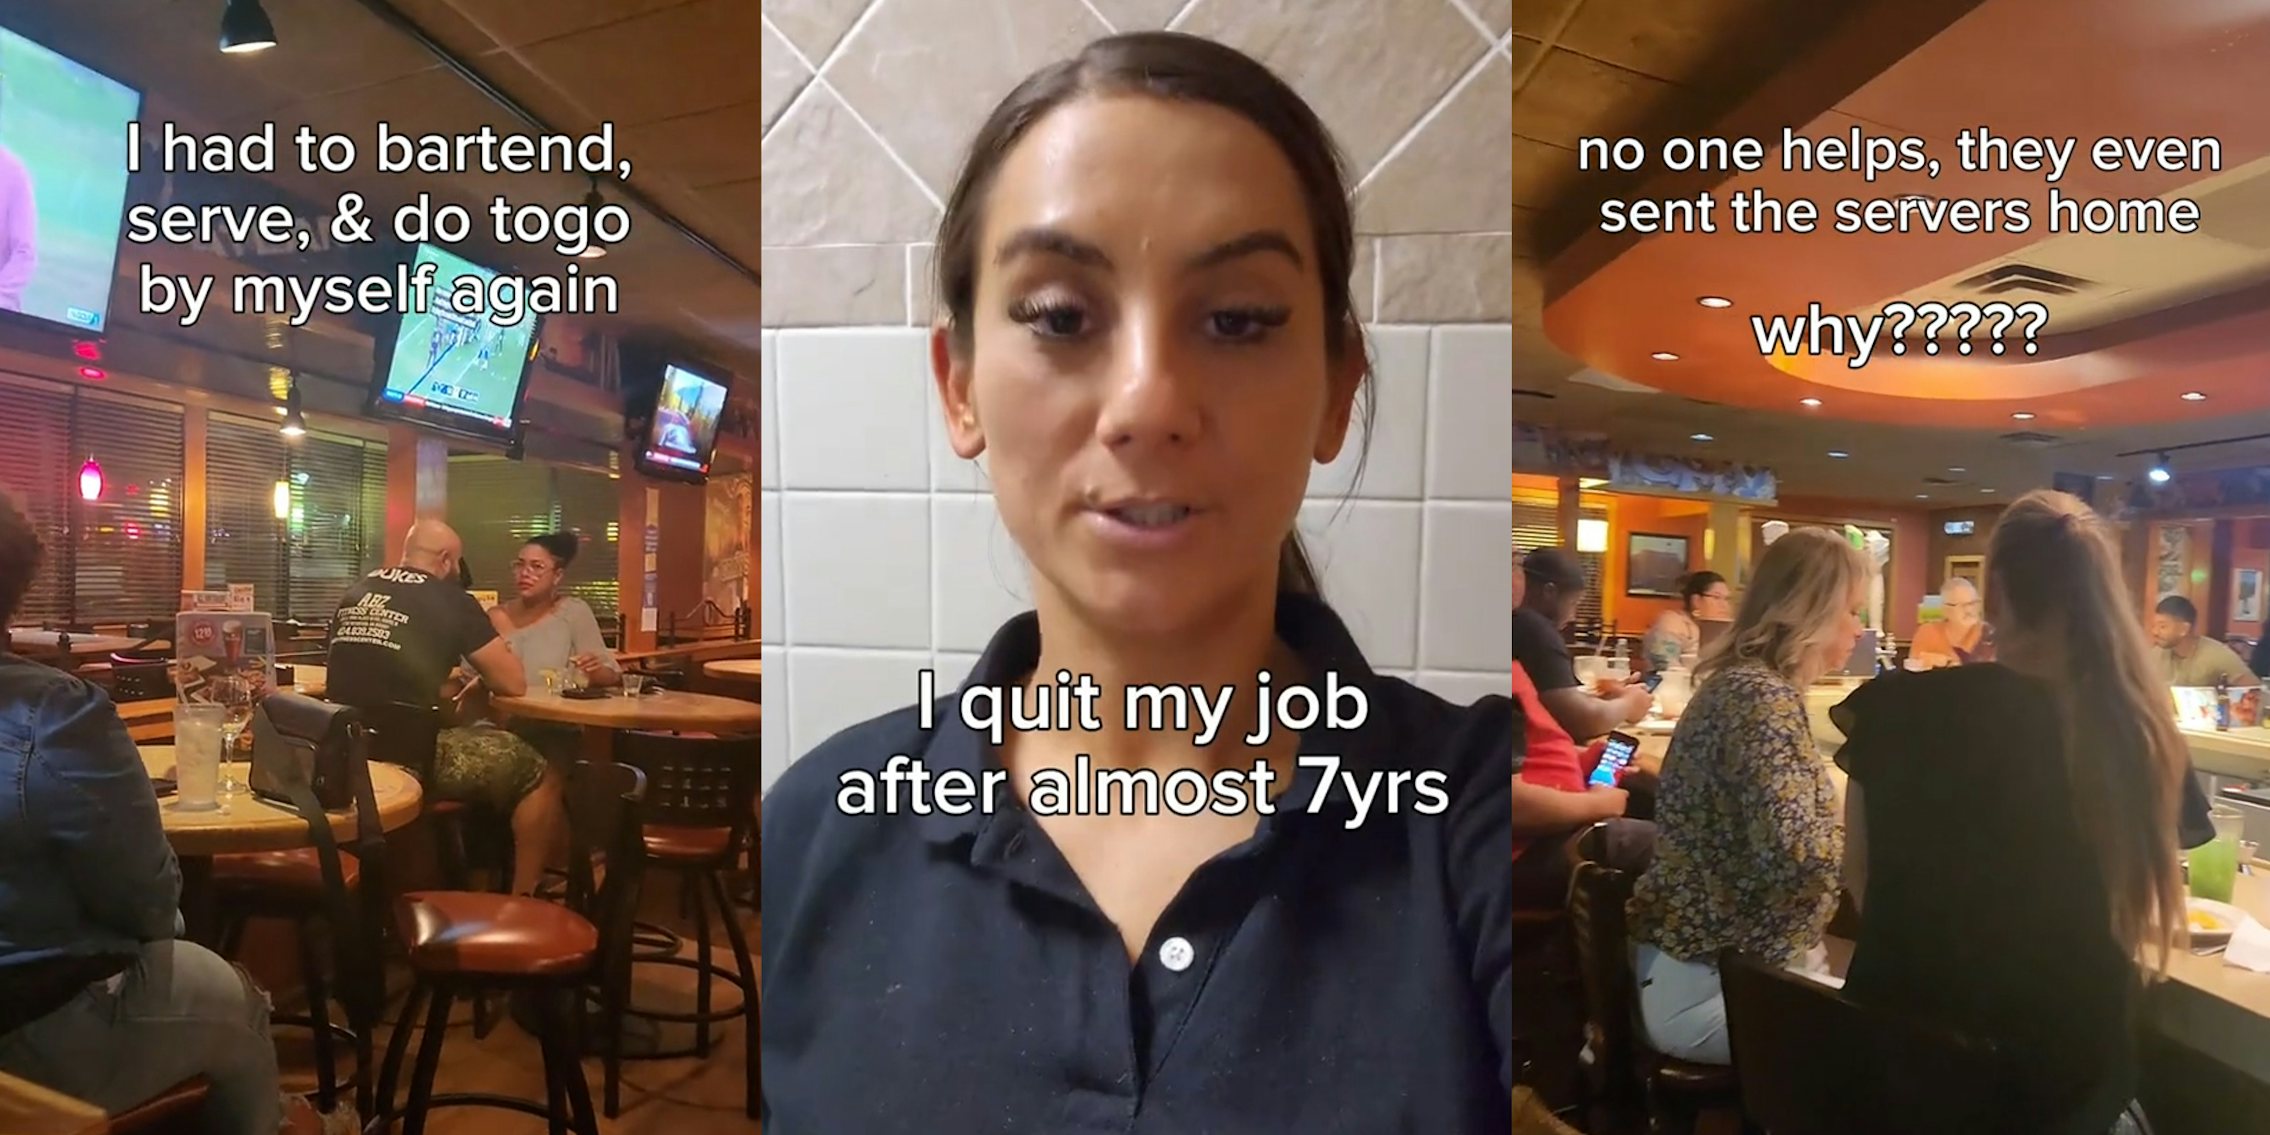 Server has to bartend, serve whole restaurant, and work to-go all by herself